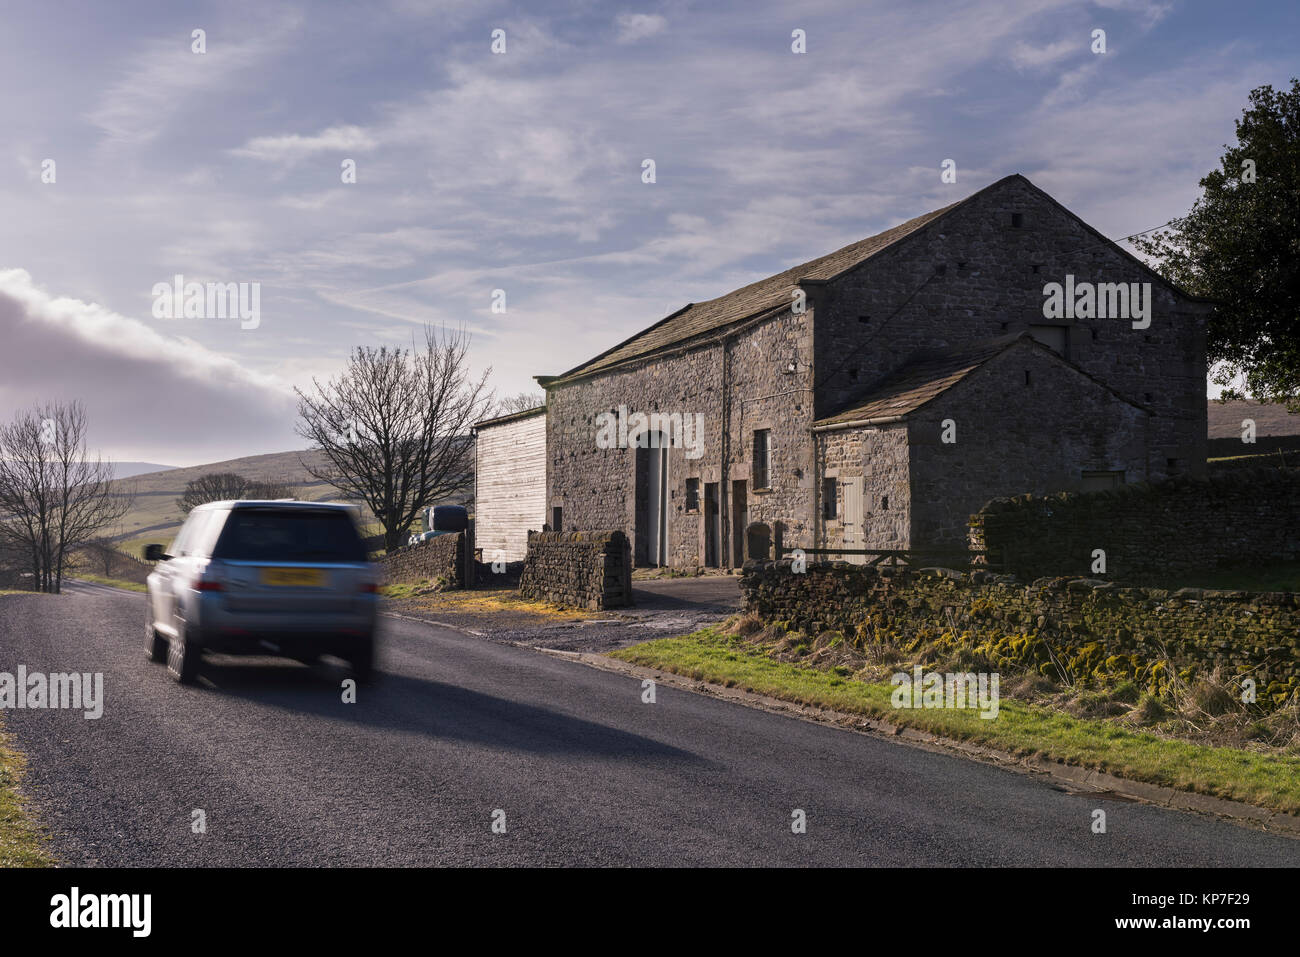 Car (Land Rover Freelander) travelling past stone, roadside barn & farm buildings on country road - Barden, Yorkshire Dales, England, UK. Stock Photo